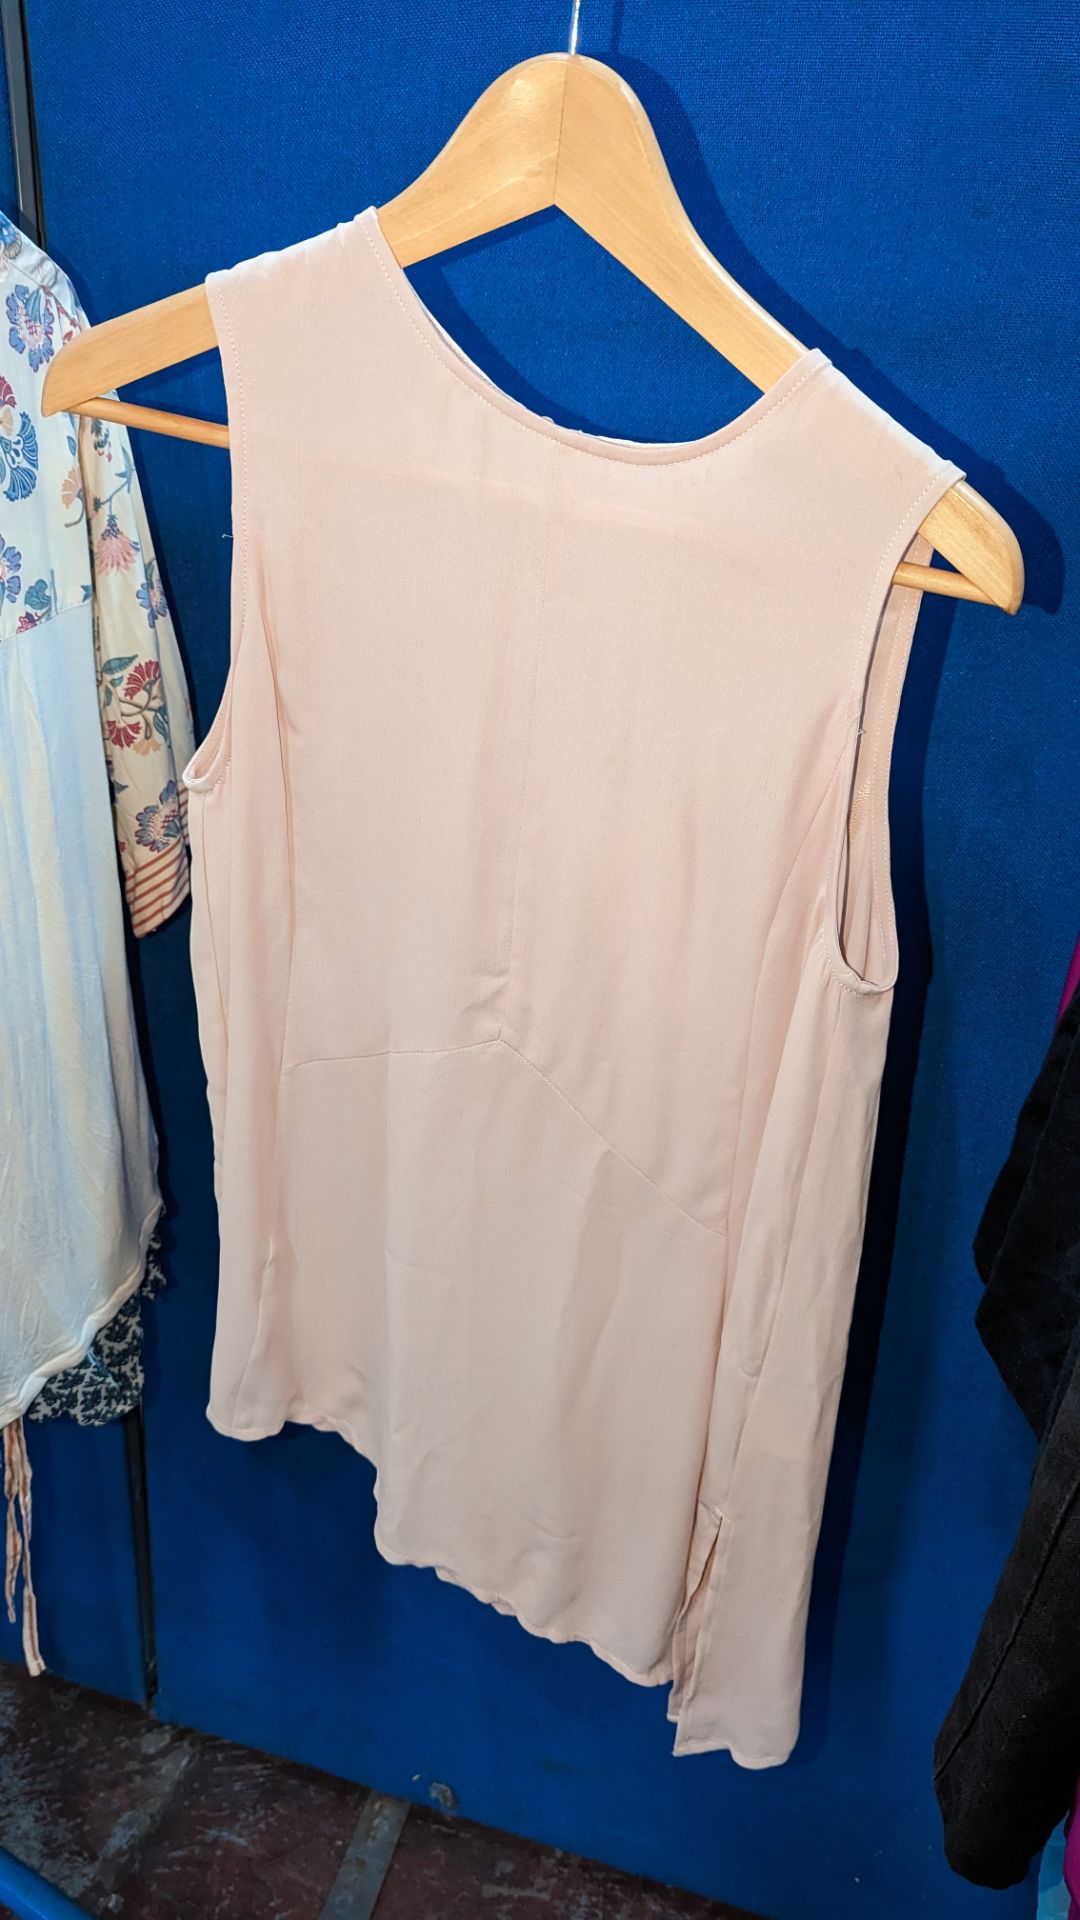 27 assorted ladies tops by a wide variety of brands including Zara, Wayne, Hush, Next, Mint Velvet, - Image 37 of 55